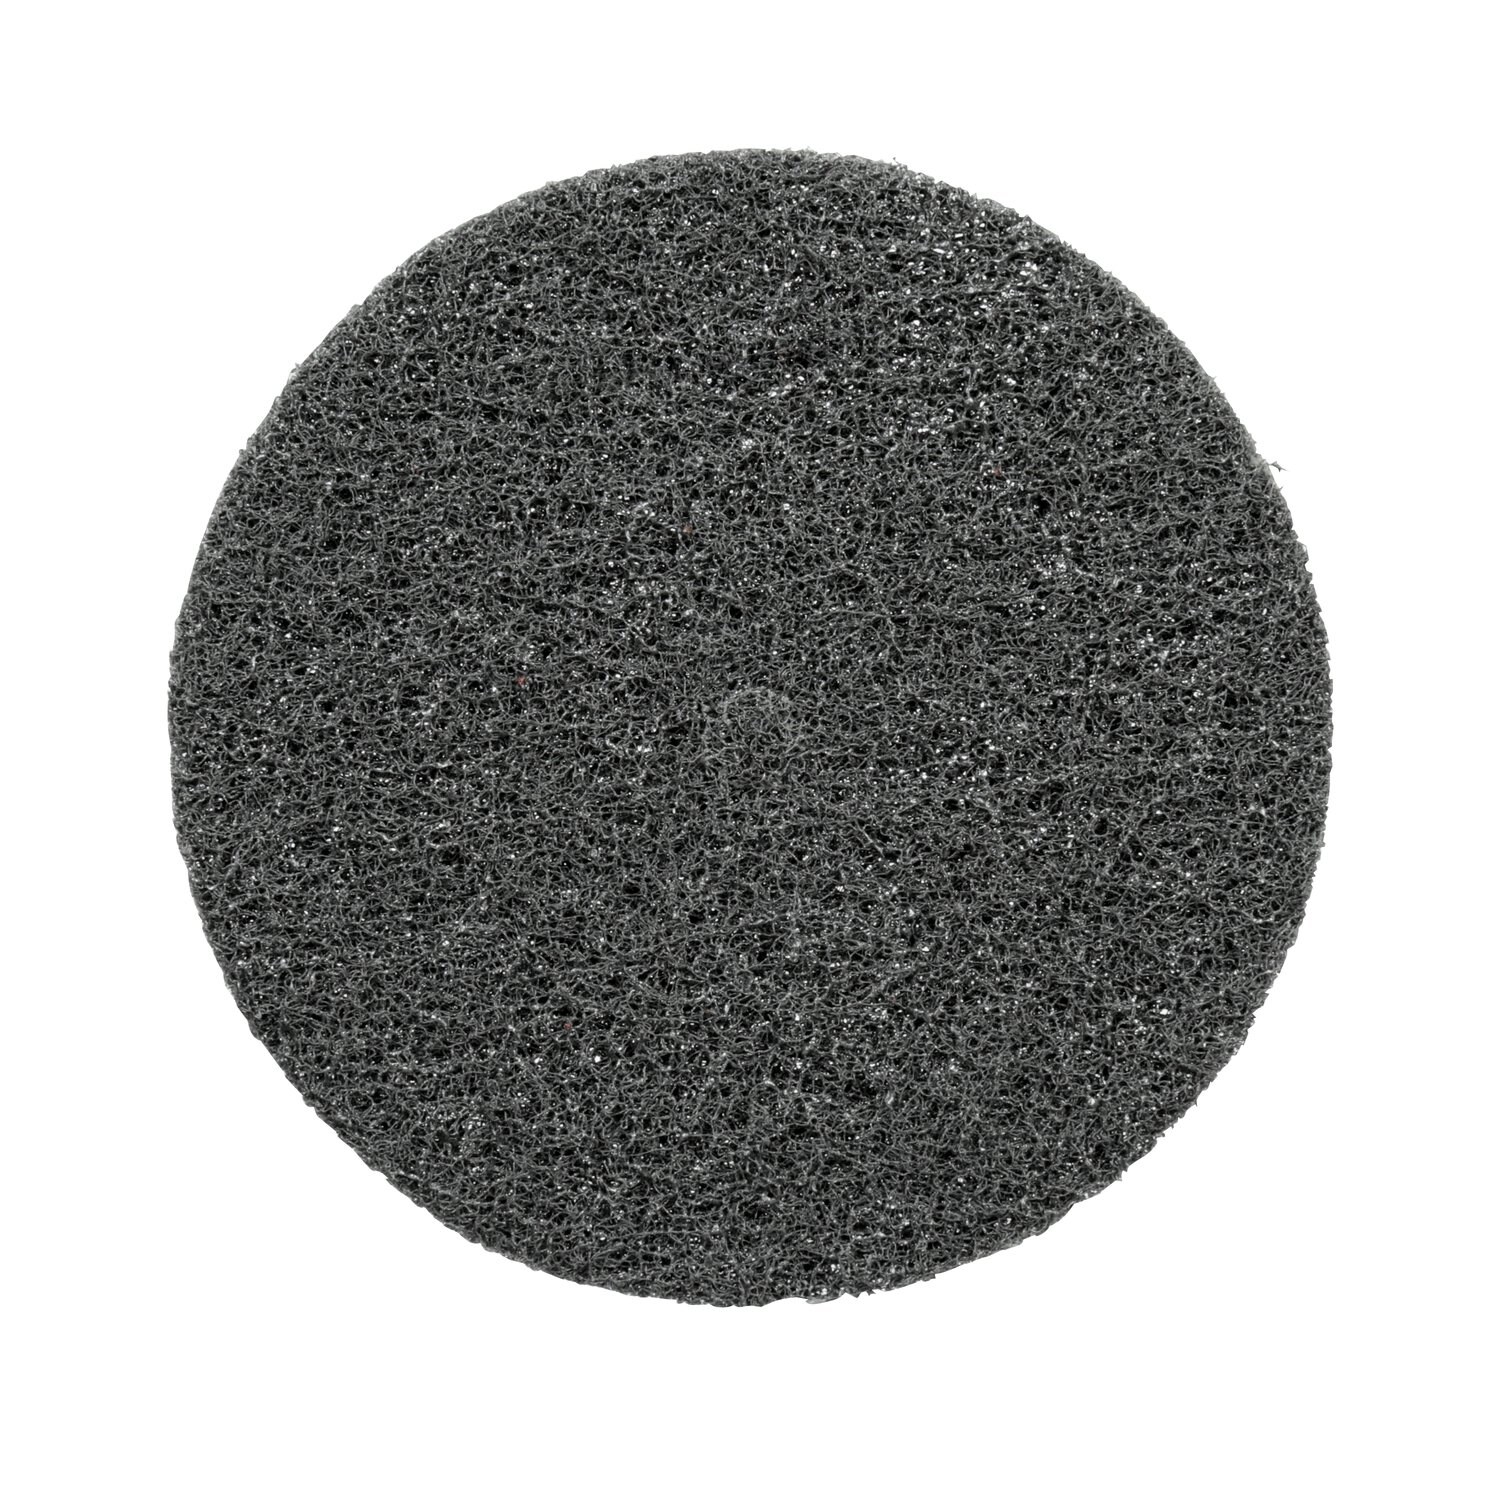 7010301221 - Standard Abrasives Buff and Blend Hook and Loop EP Disc, 820709, 6 in x
1/2 in A FIN, 10/Bag, 100 ea/Case